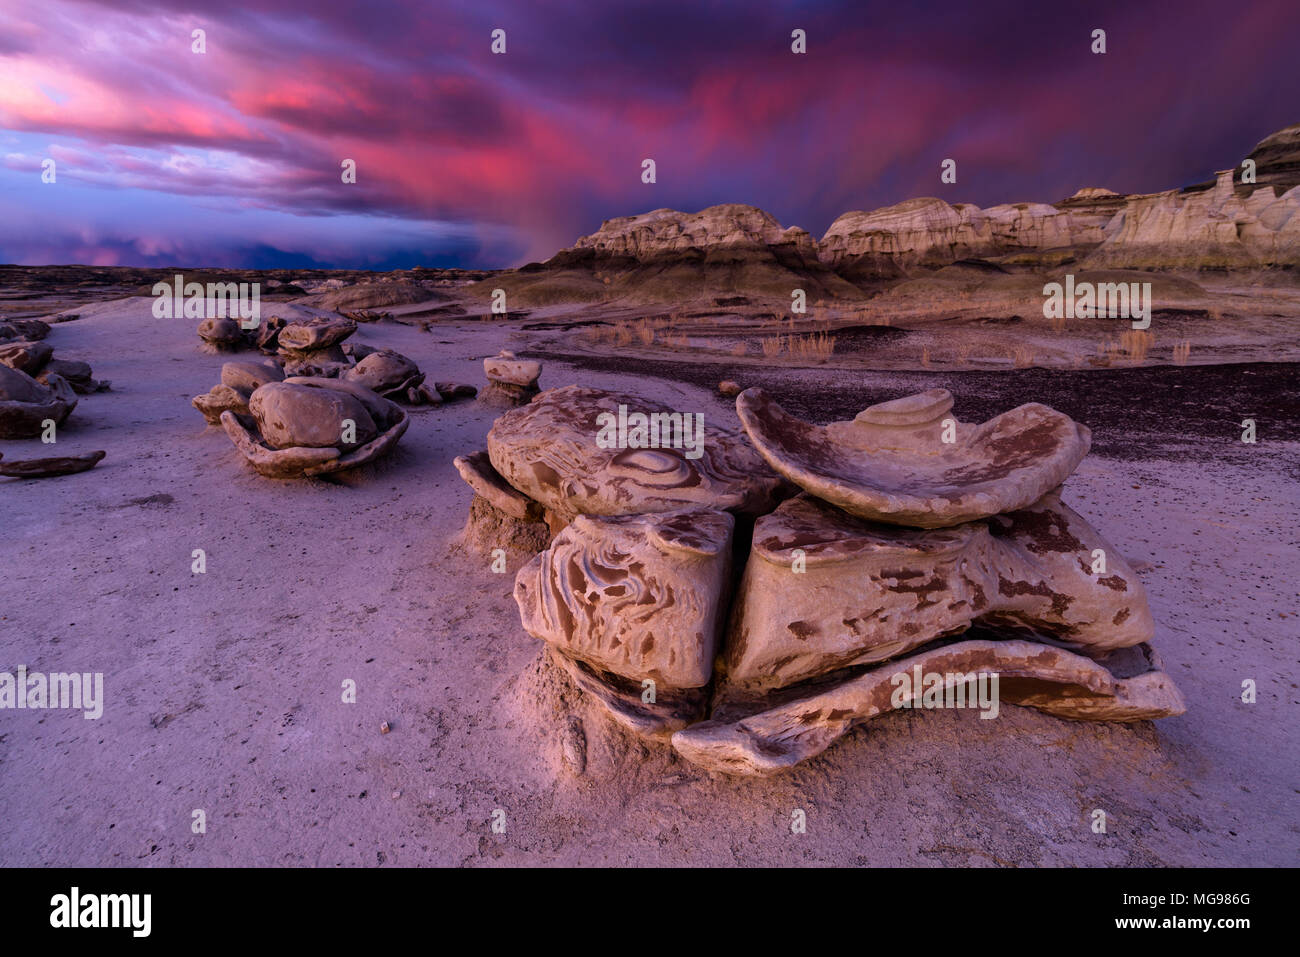 Bisti or De-Na-Zin Wilderness Area or badlands rock formations at sunset with storm clouds in background, New Mexico, USA Stock Photo